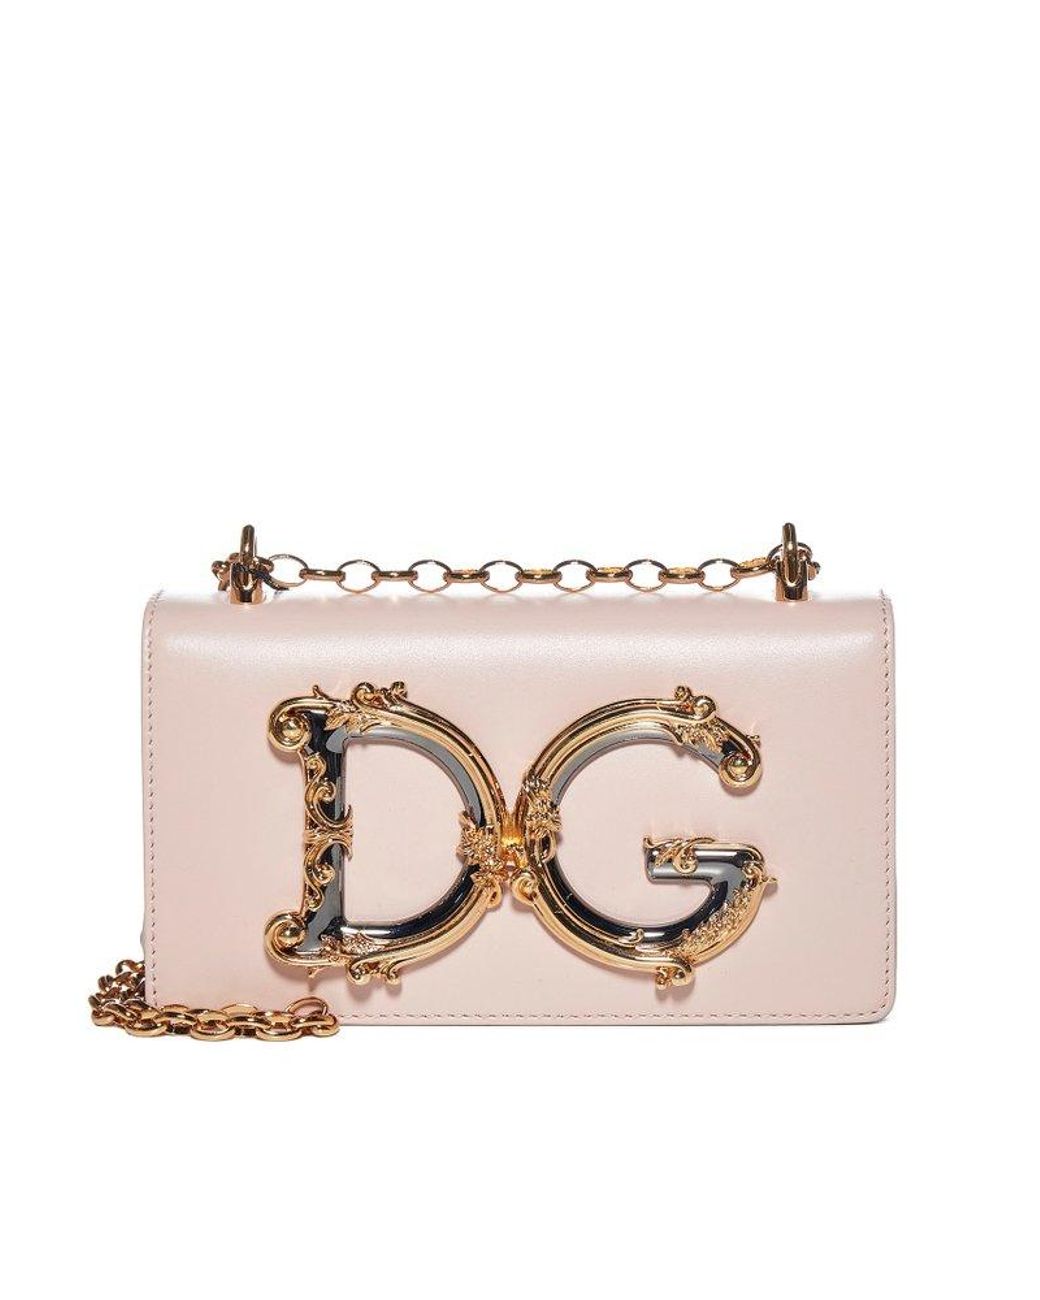 Dolce & Gabbana Dg Girls Leather Phone Bag in Natural | Lyst